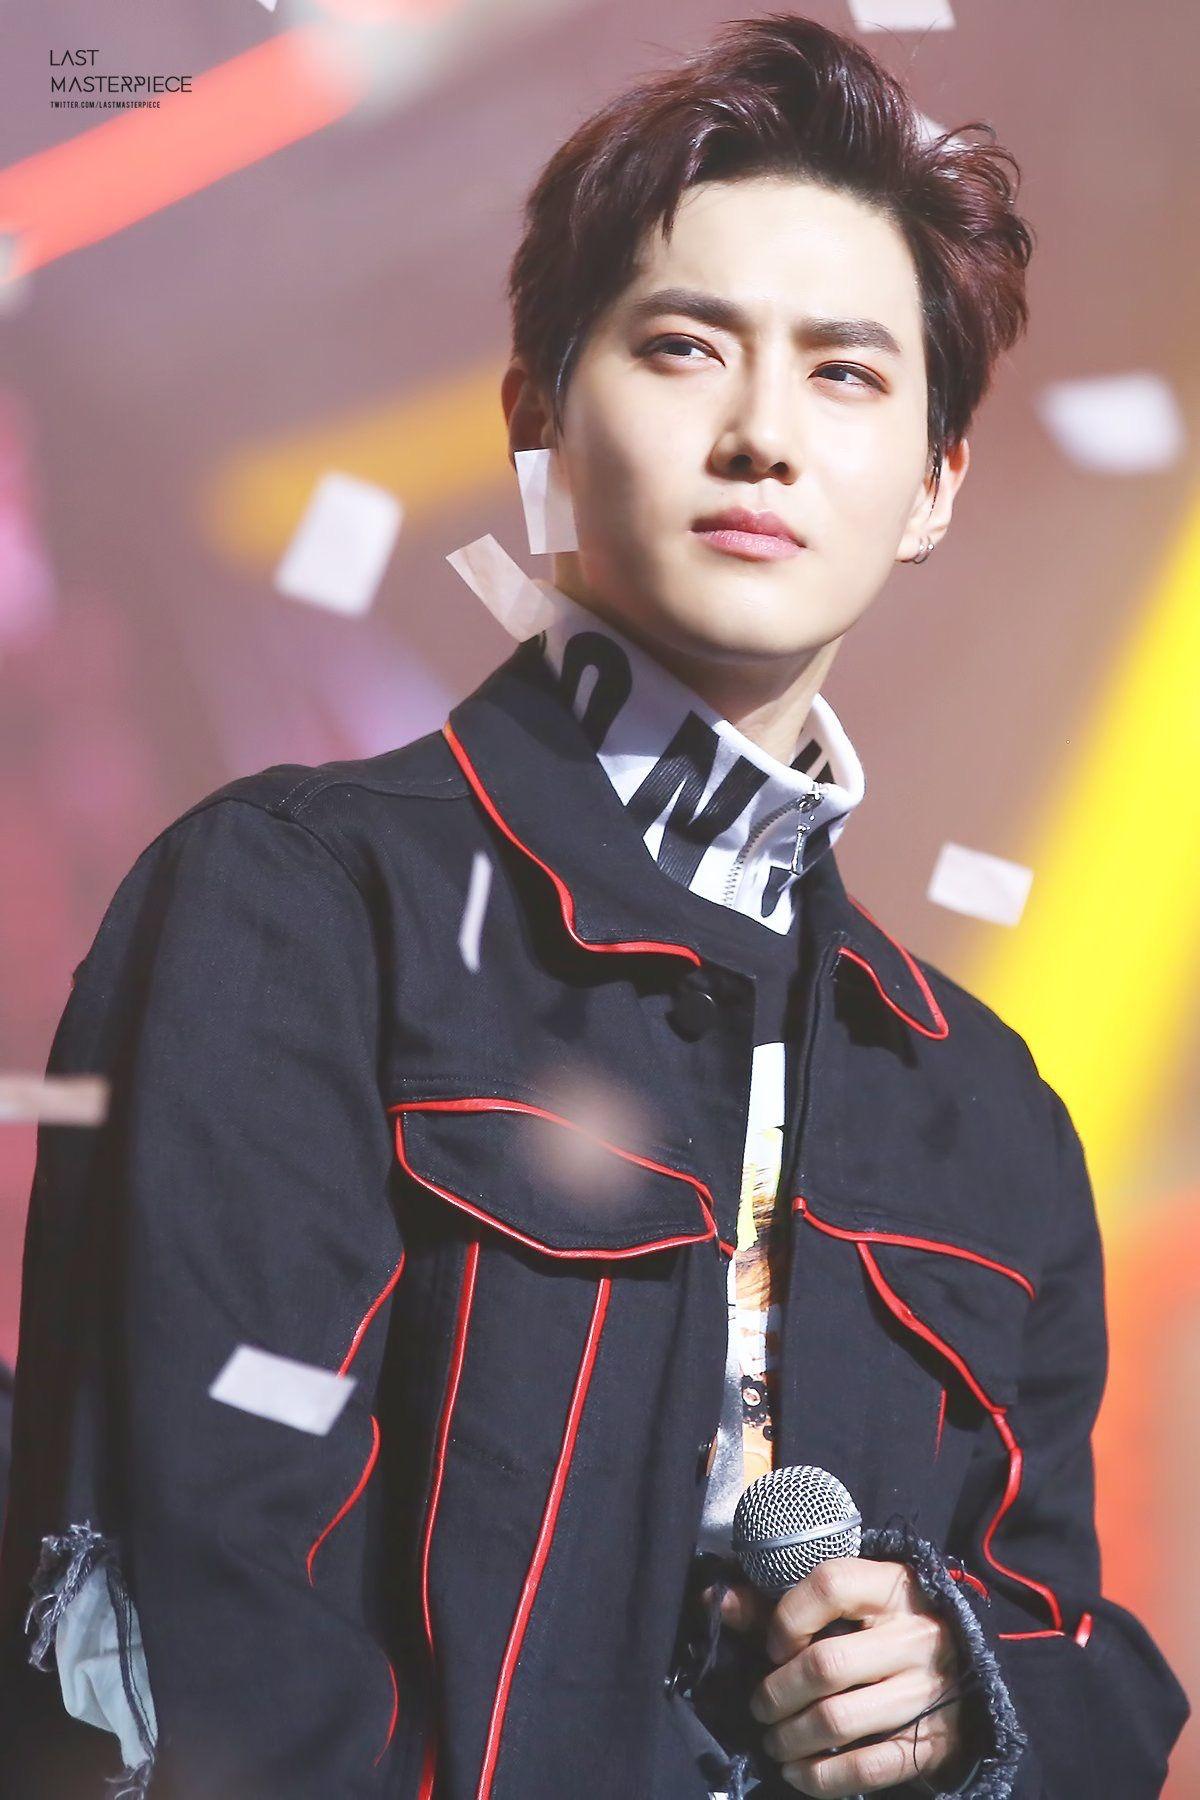 Suho, Android IPhone Wallpaper KPOP JPOP Image Board